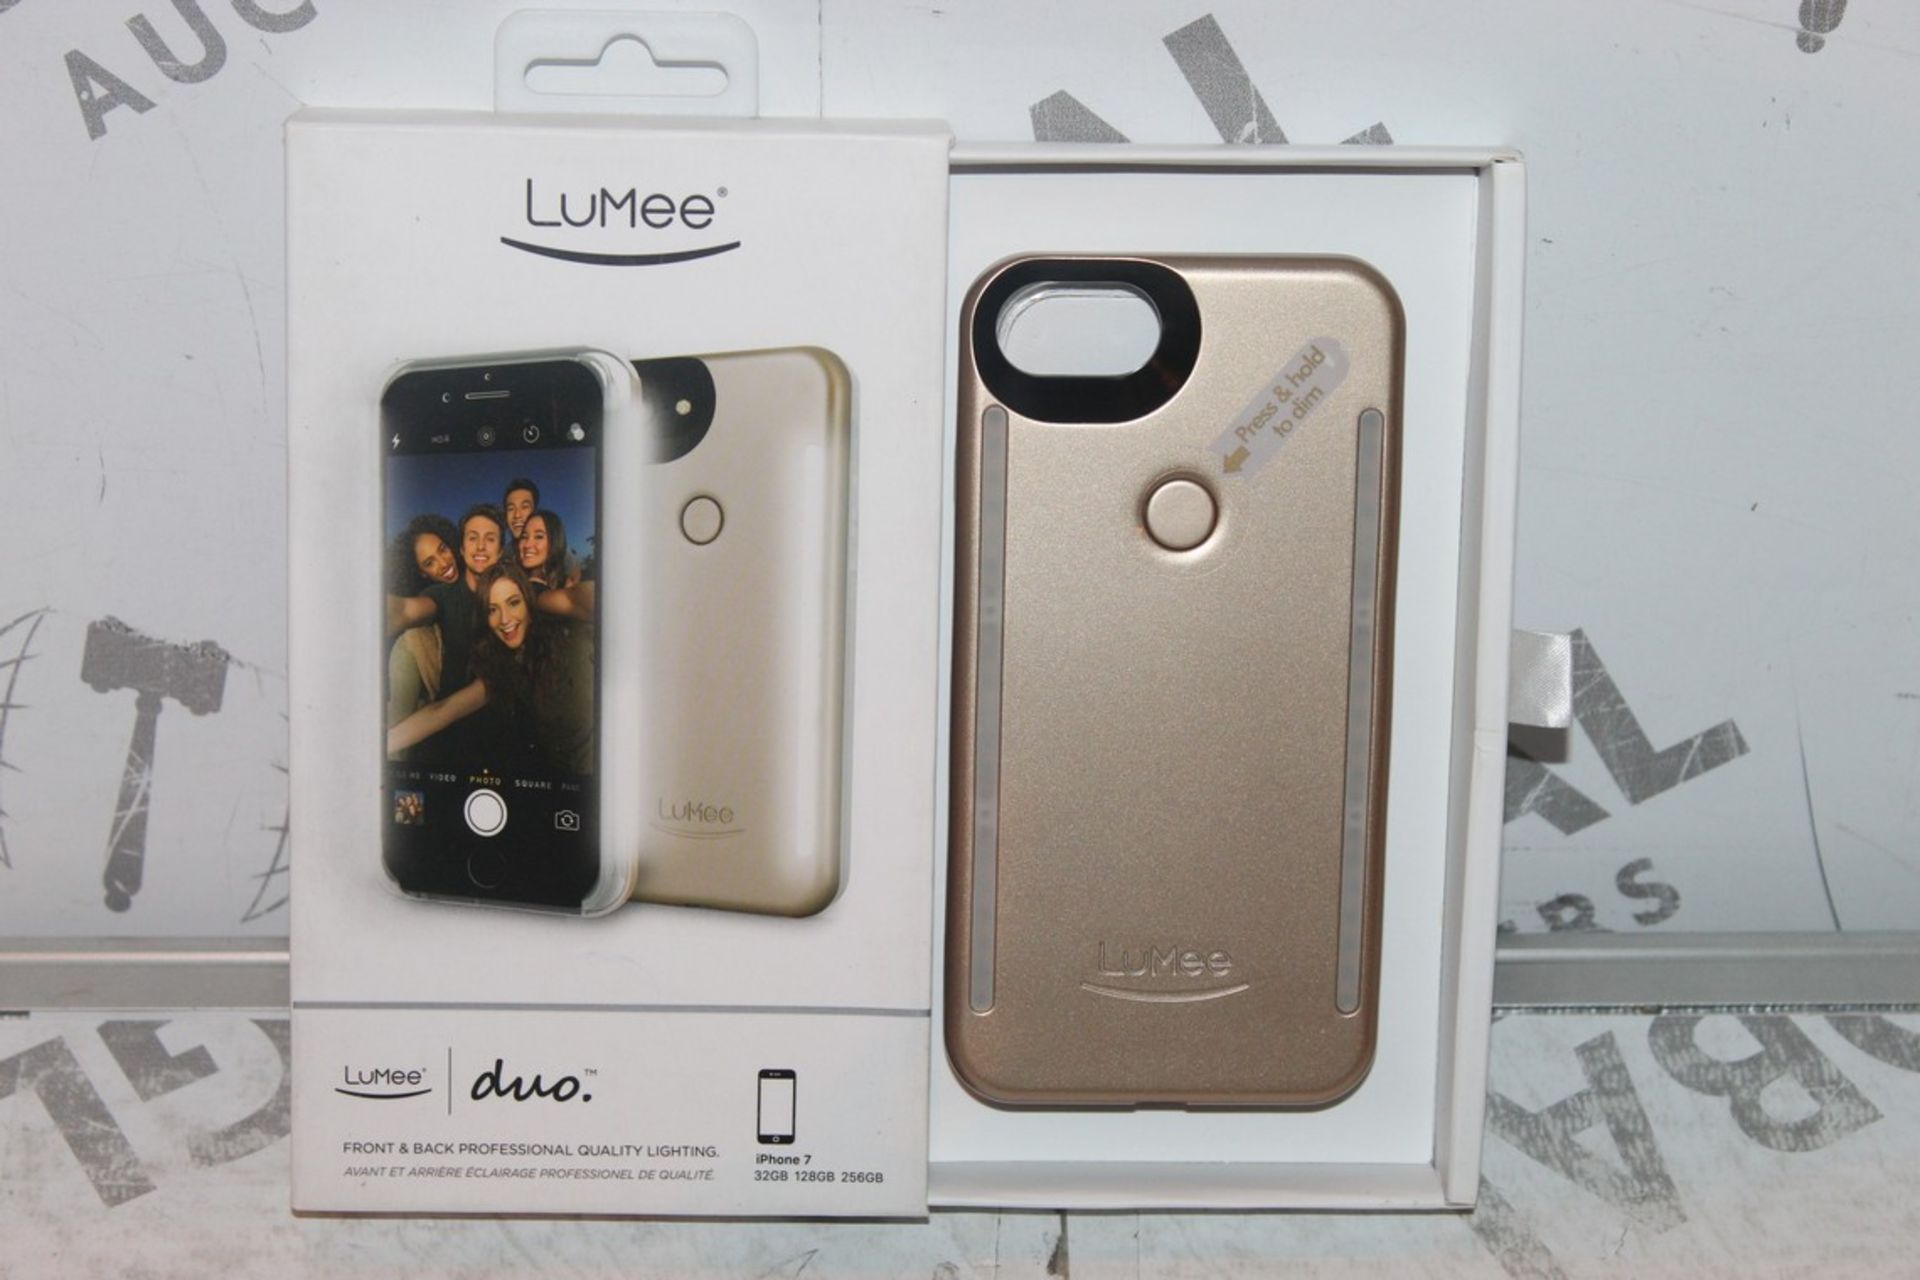 Lot to Contain 5 Assorted Lumee Front and Back Professional Lighting Cases for Assorted iPhone to